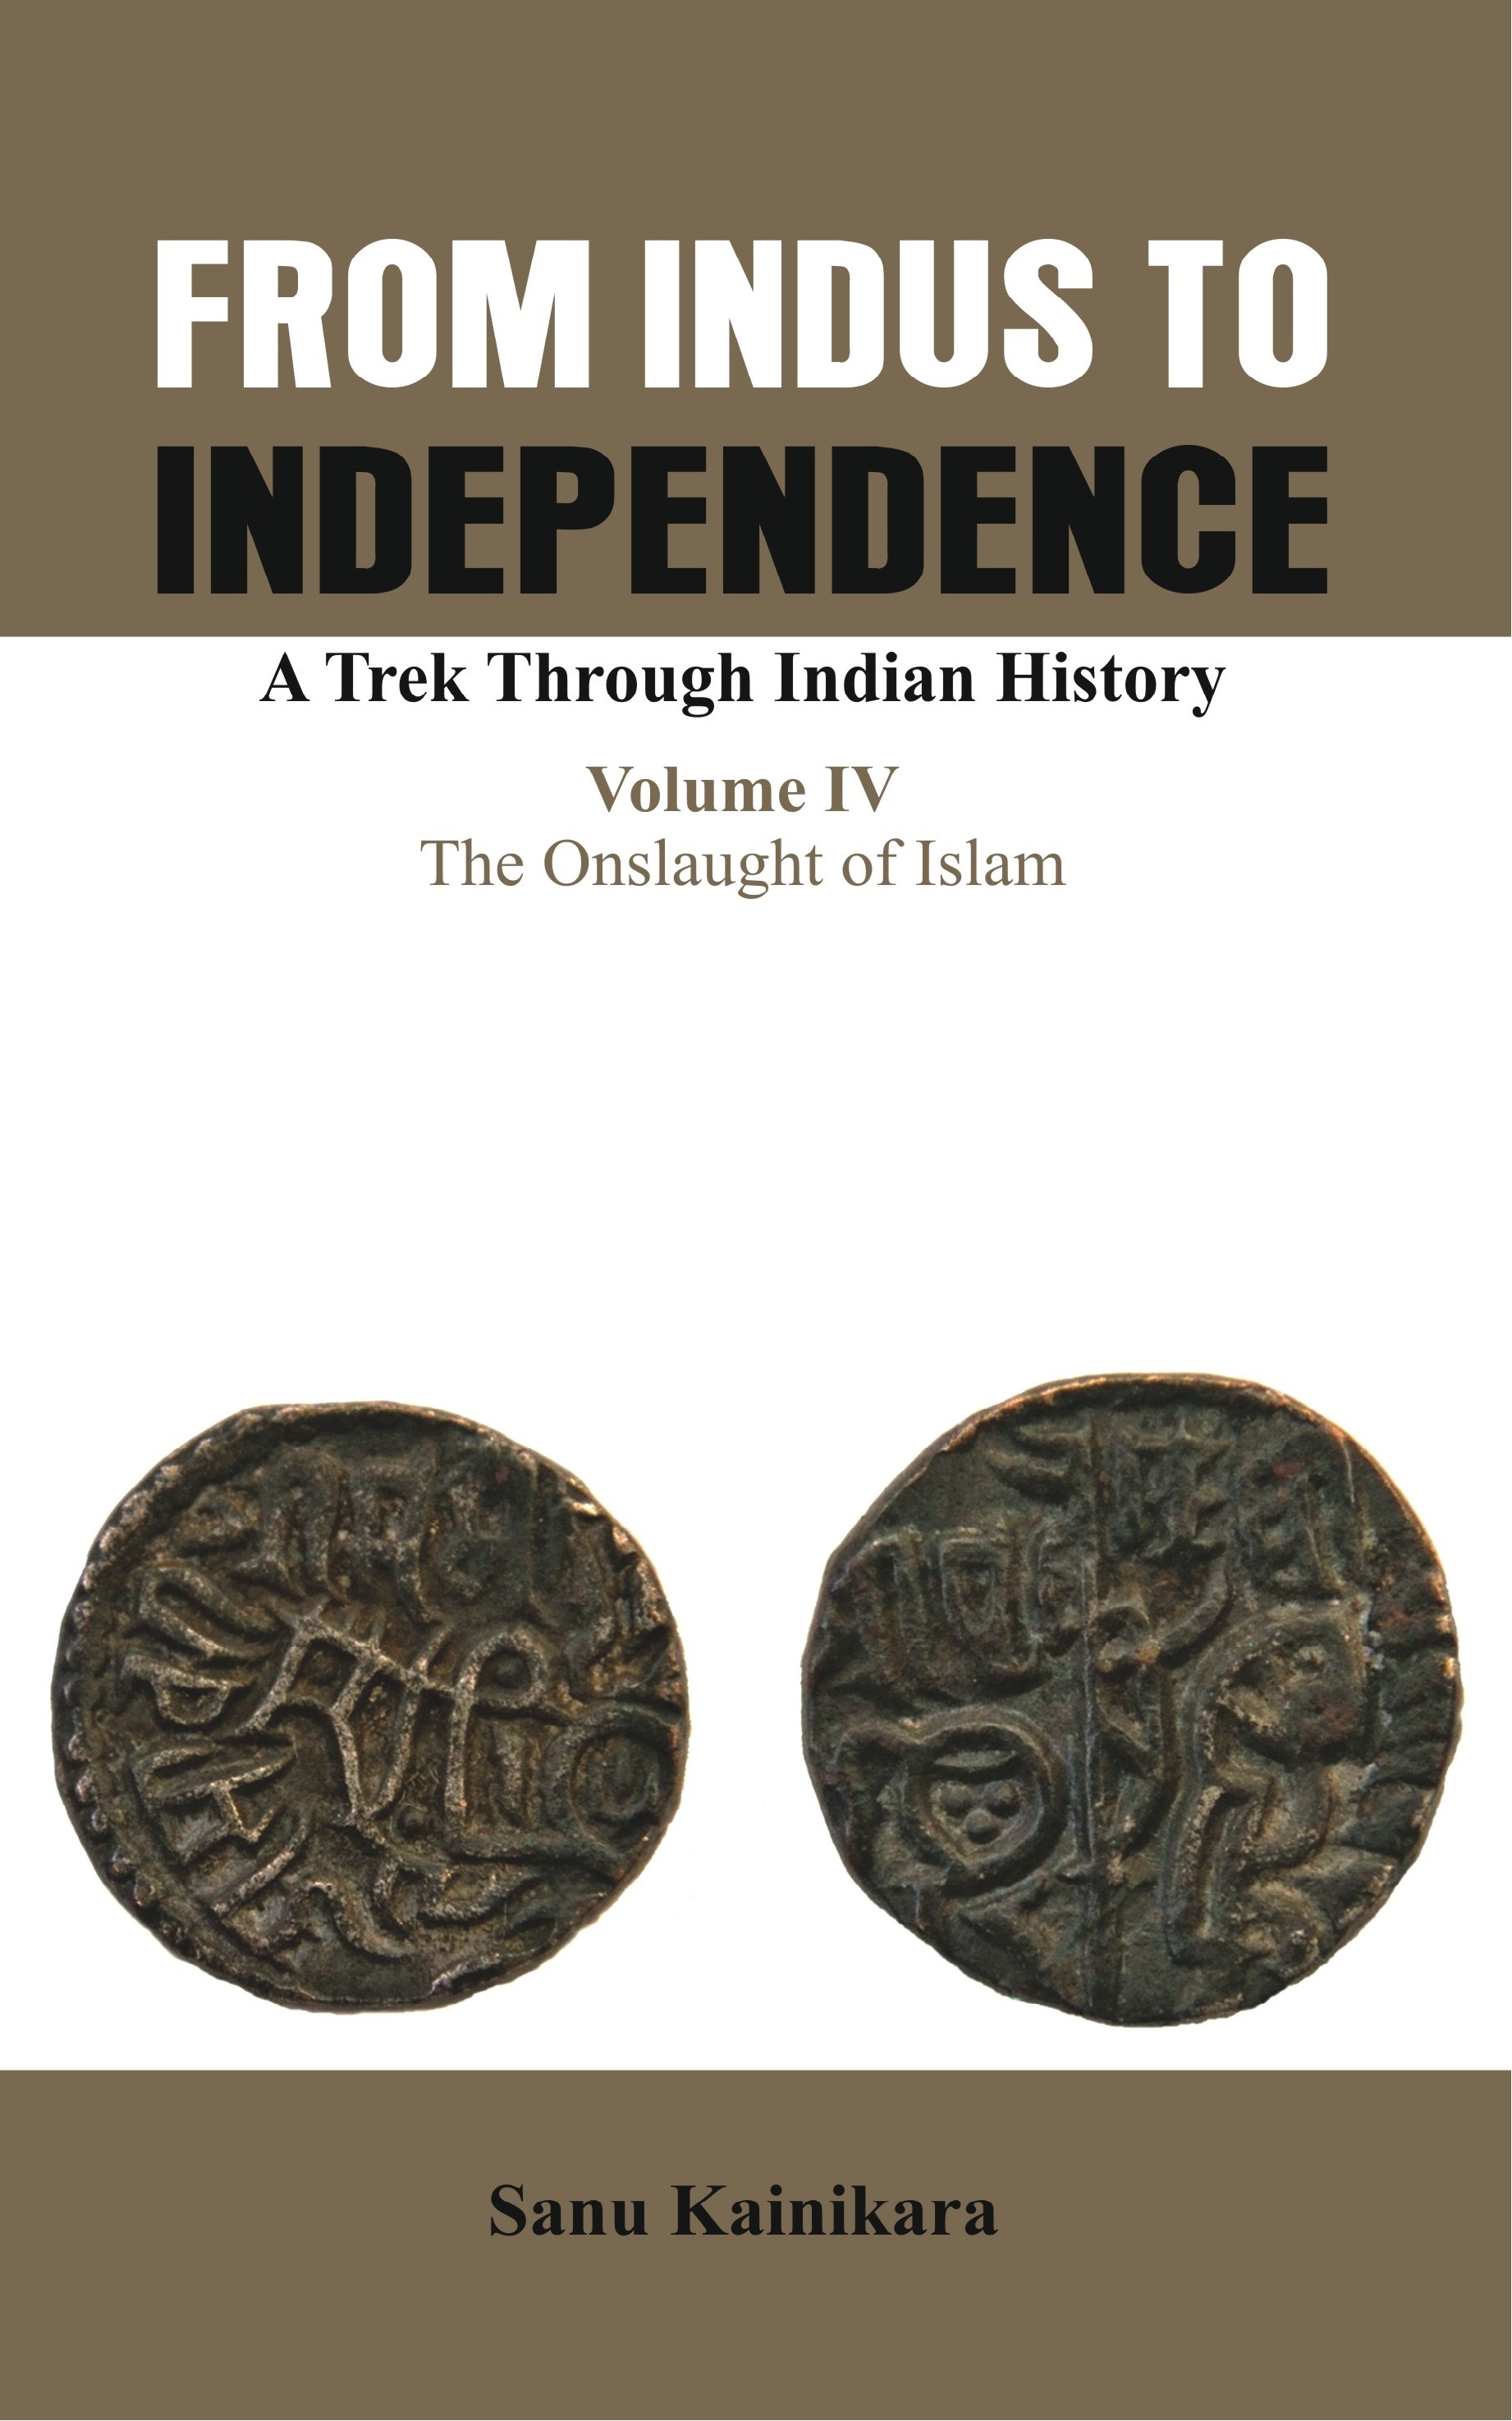 From Indus to Independence- A Trek Through Indian History (Vol IV The Onslaught of Islam)